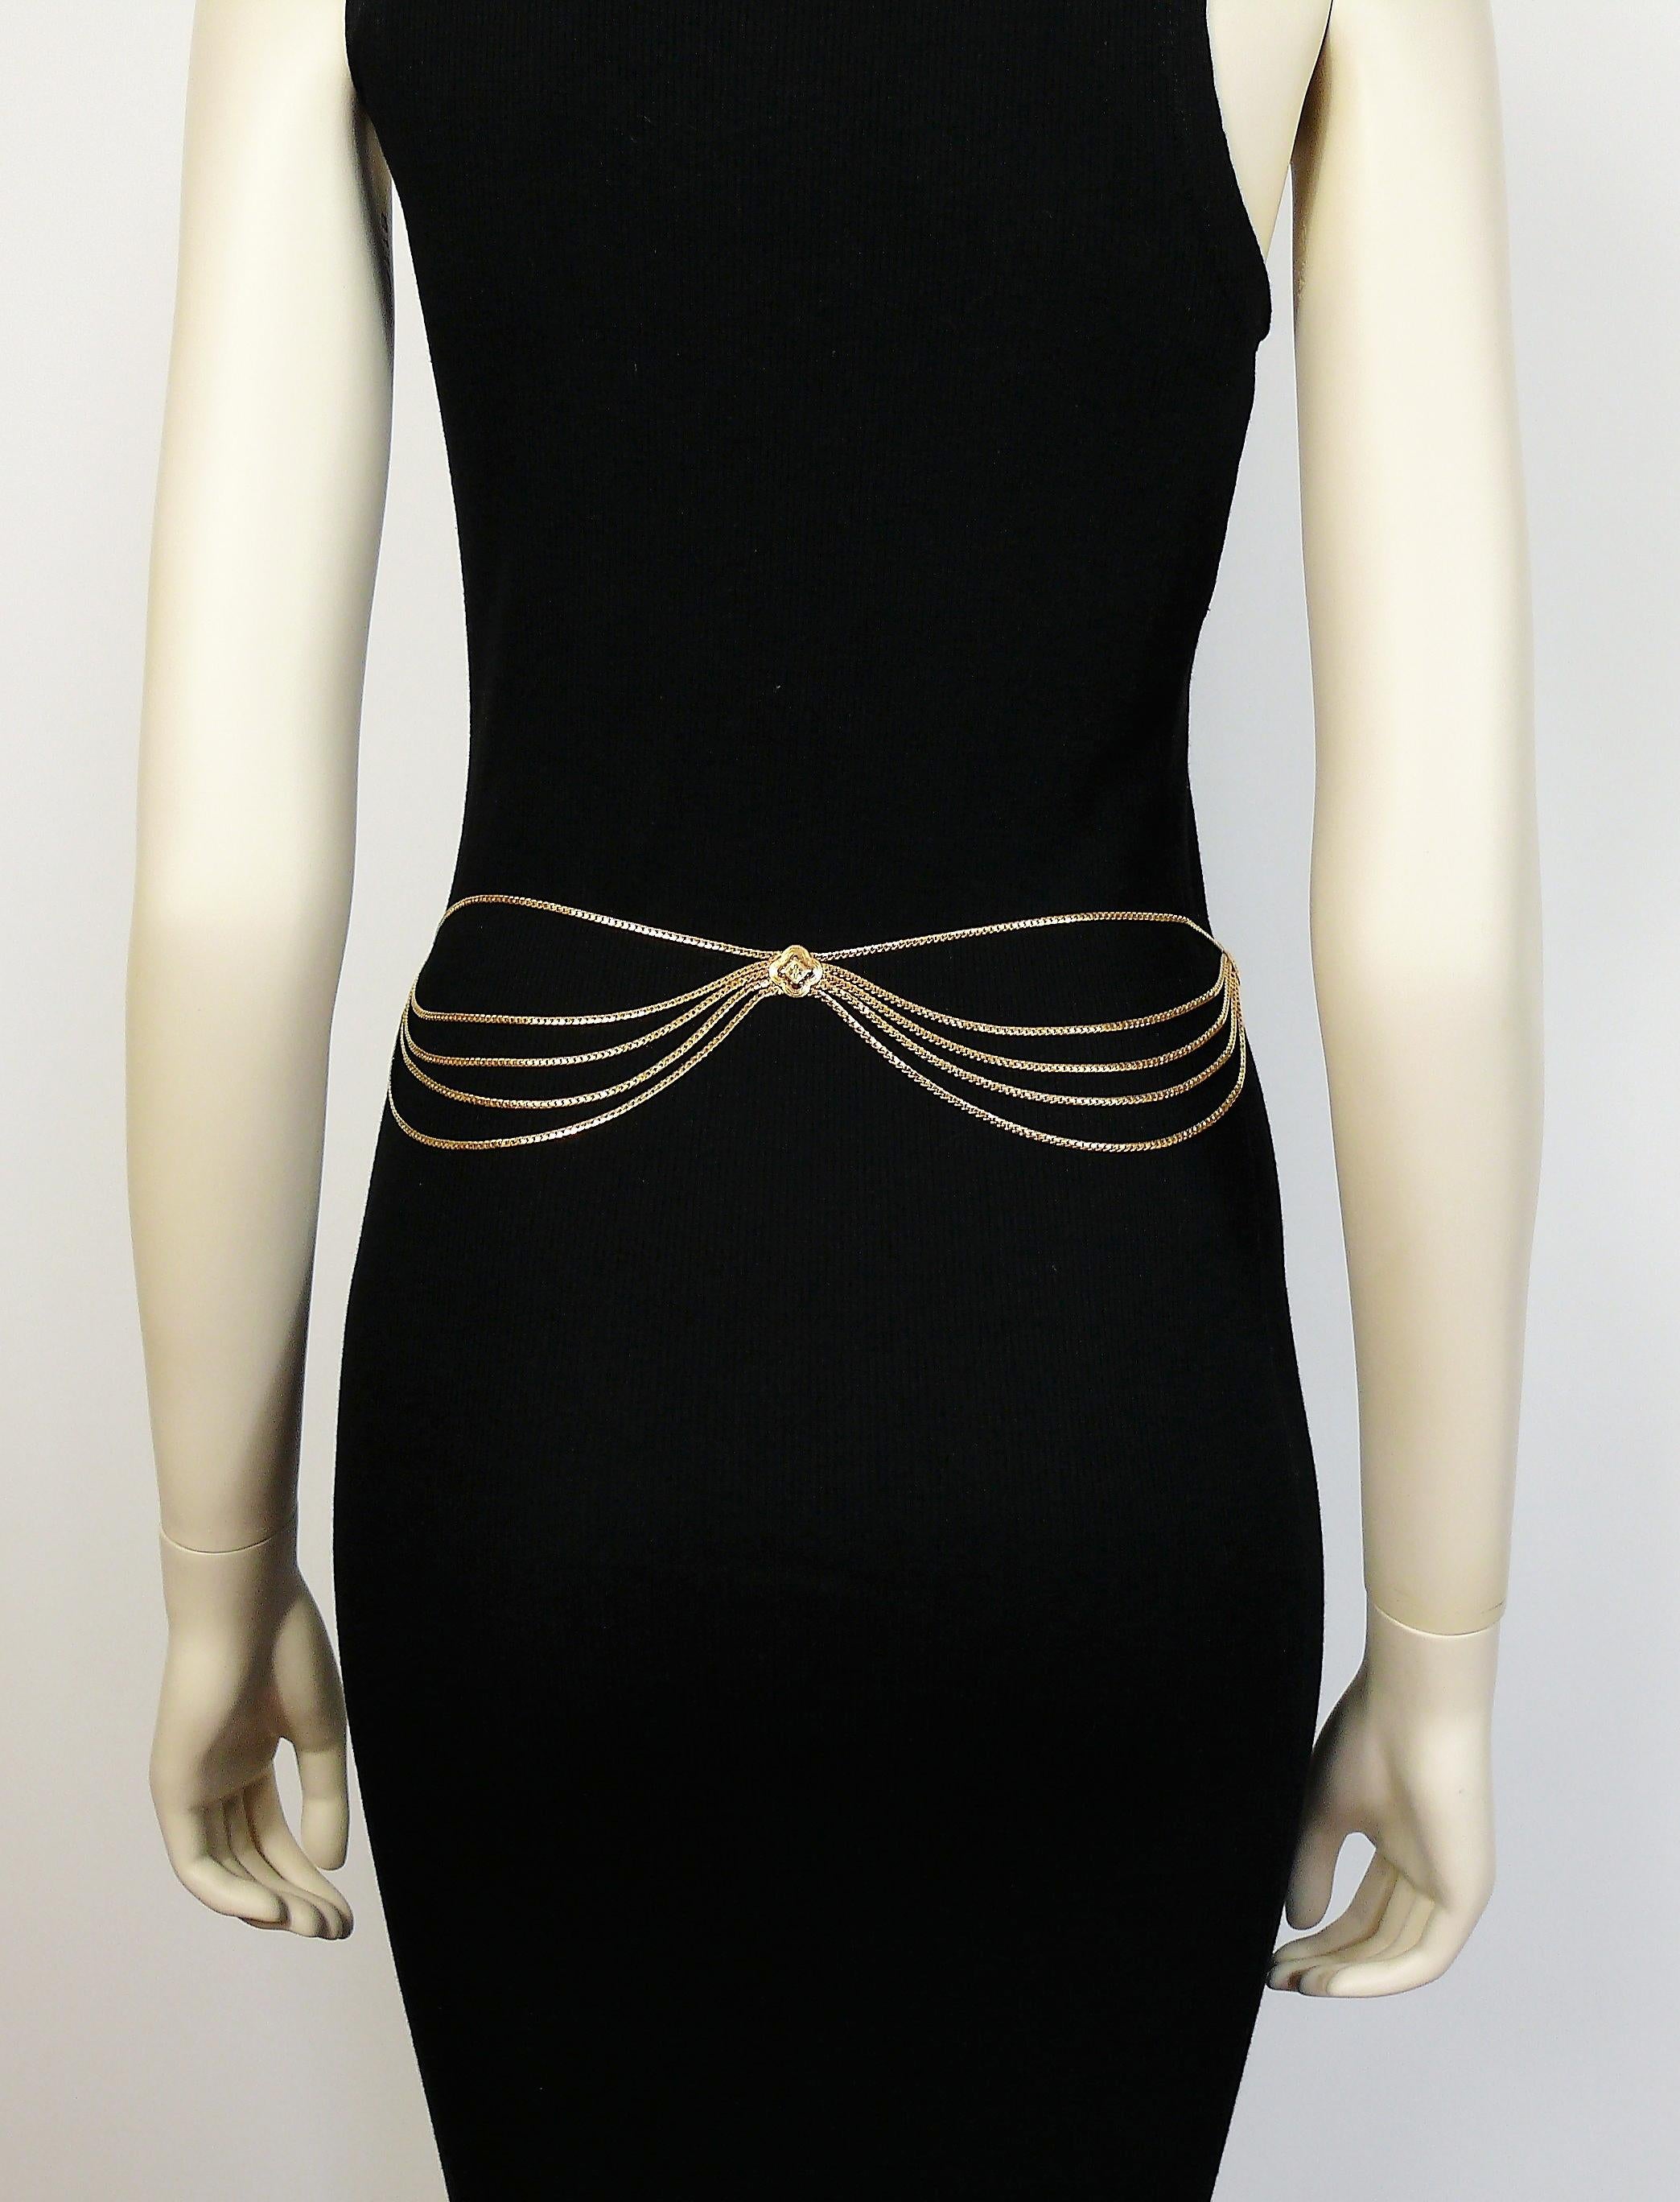 Christian Dior Vintage Gold Toned Chain Link Draping Belt 4